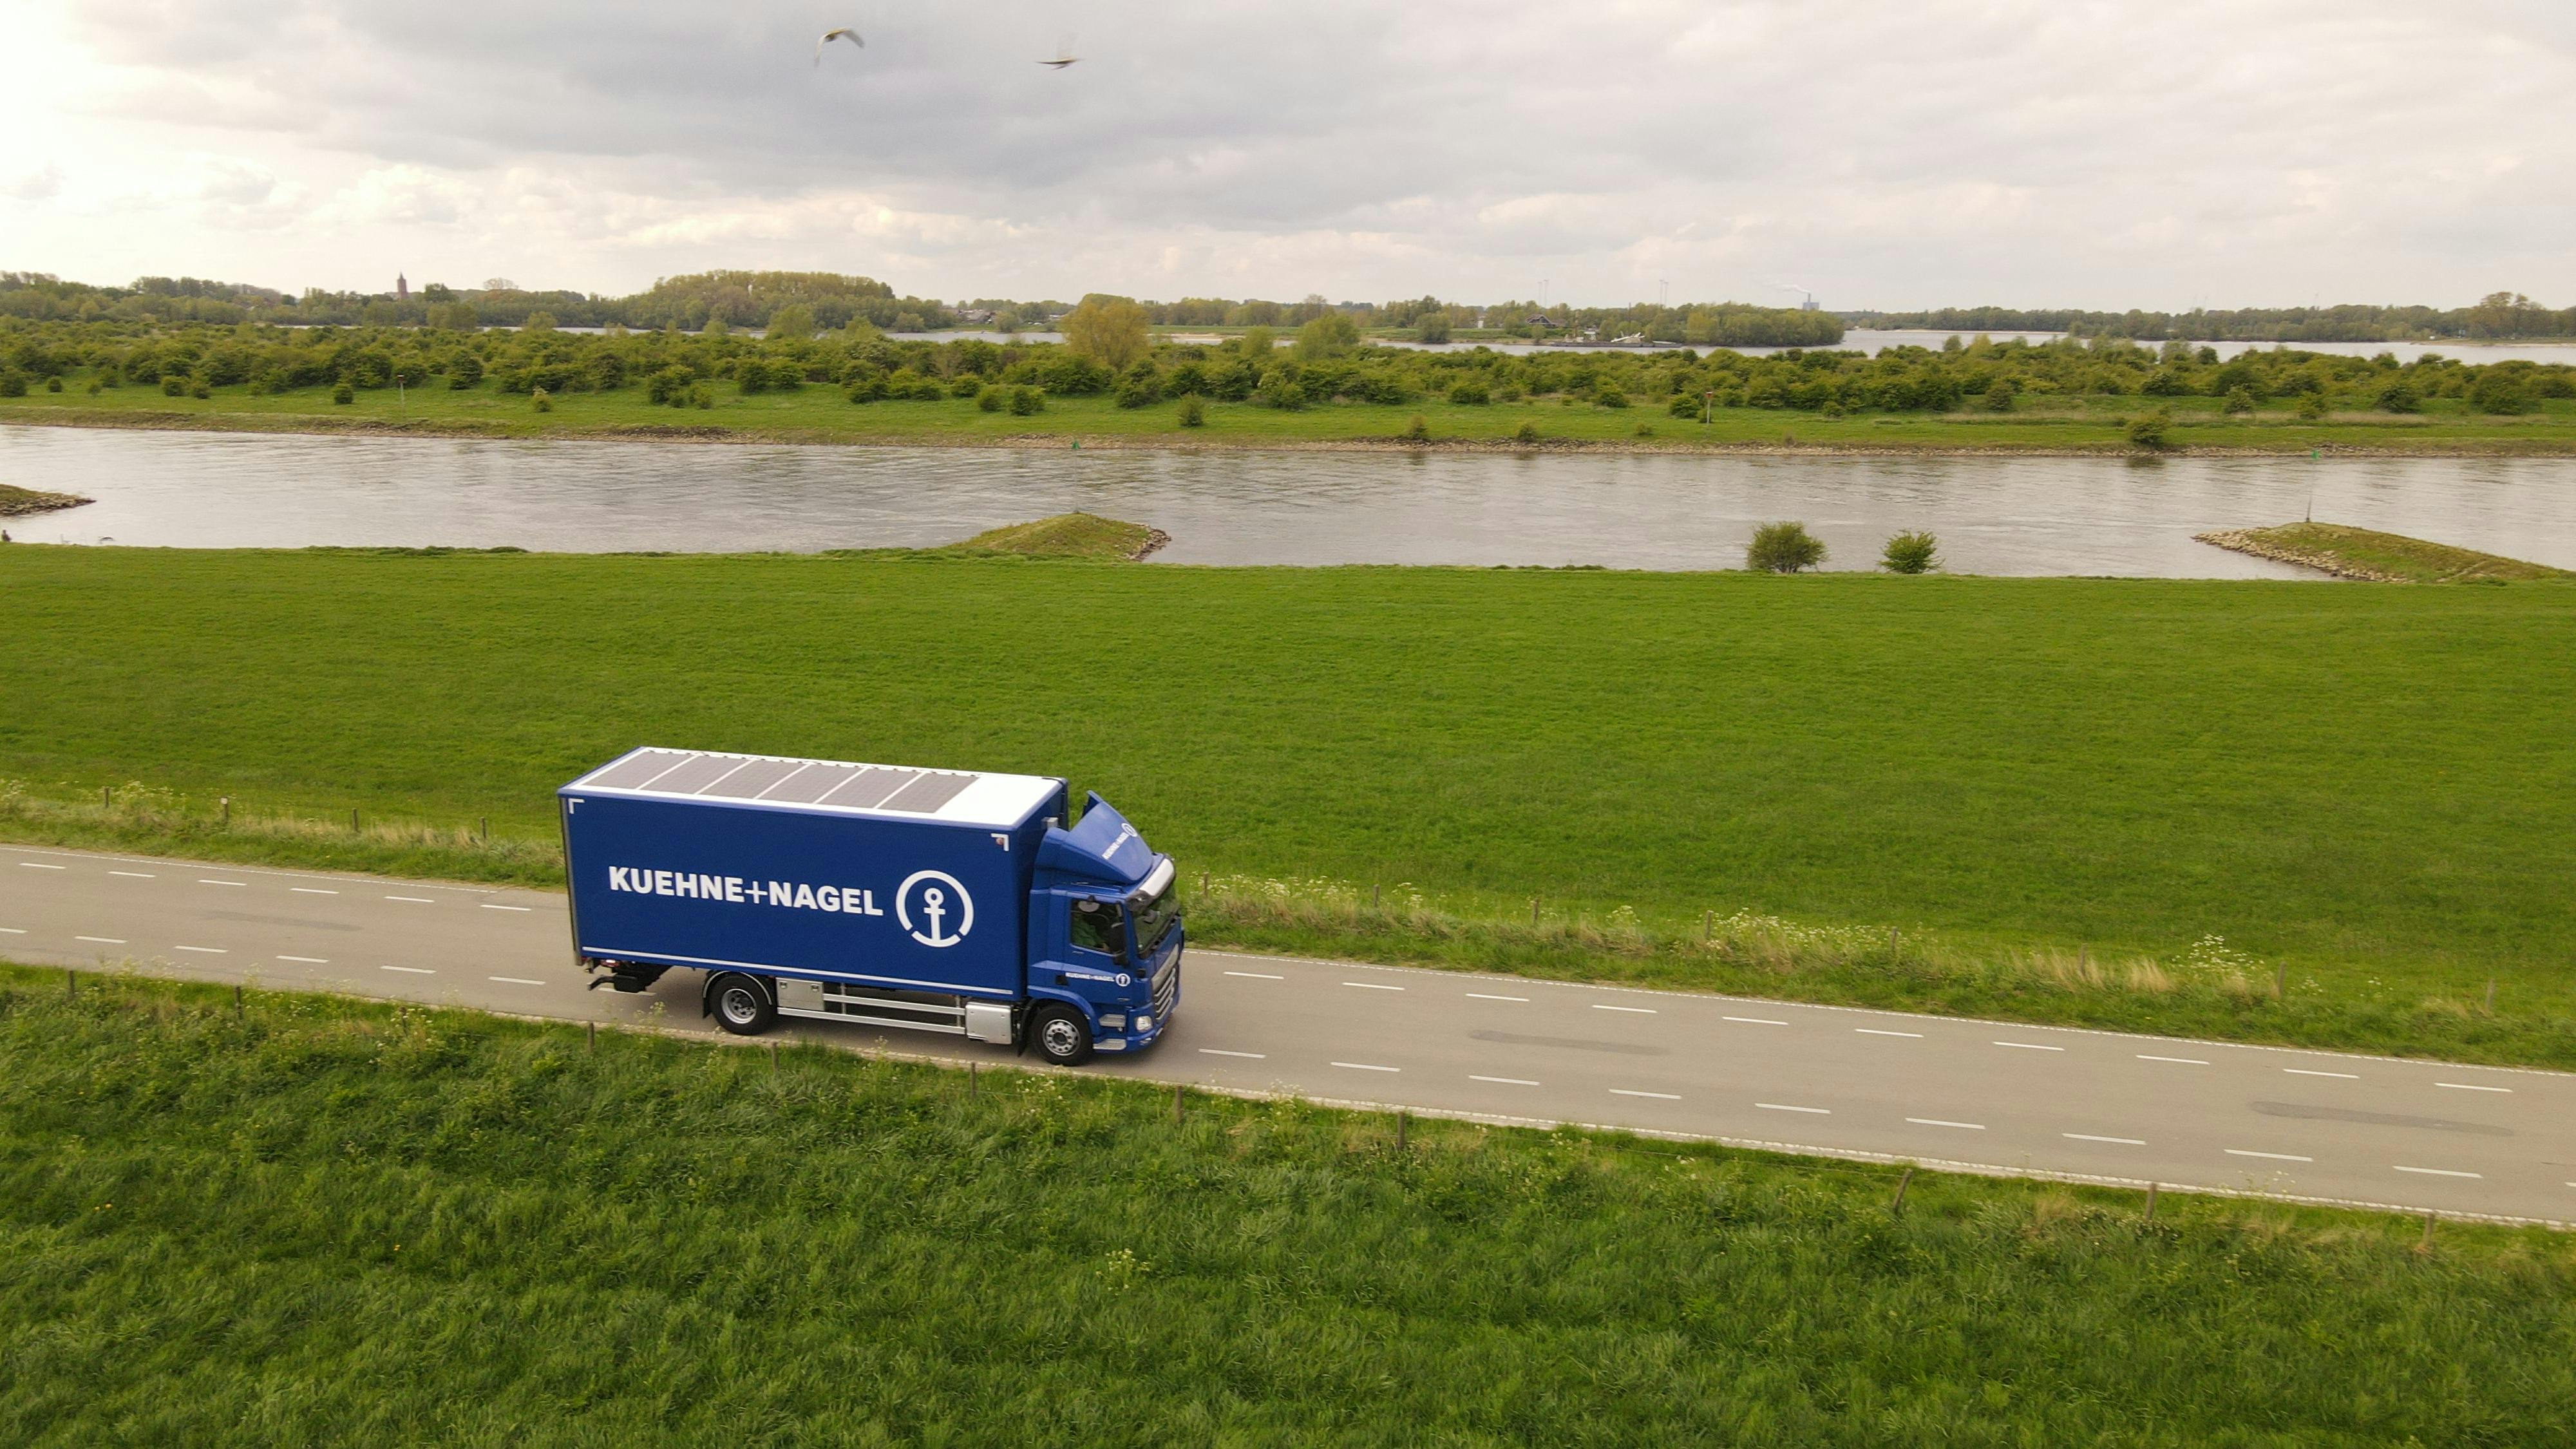 Kuehne+Nagel is driving with the power of the sun to save fuel